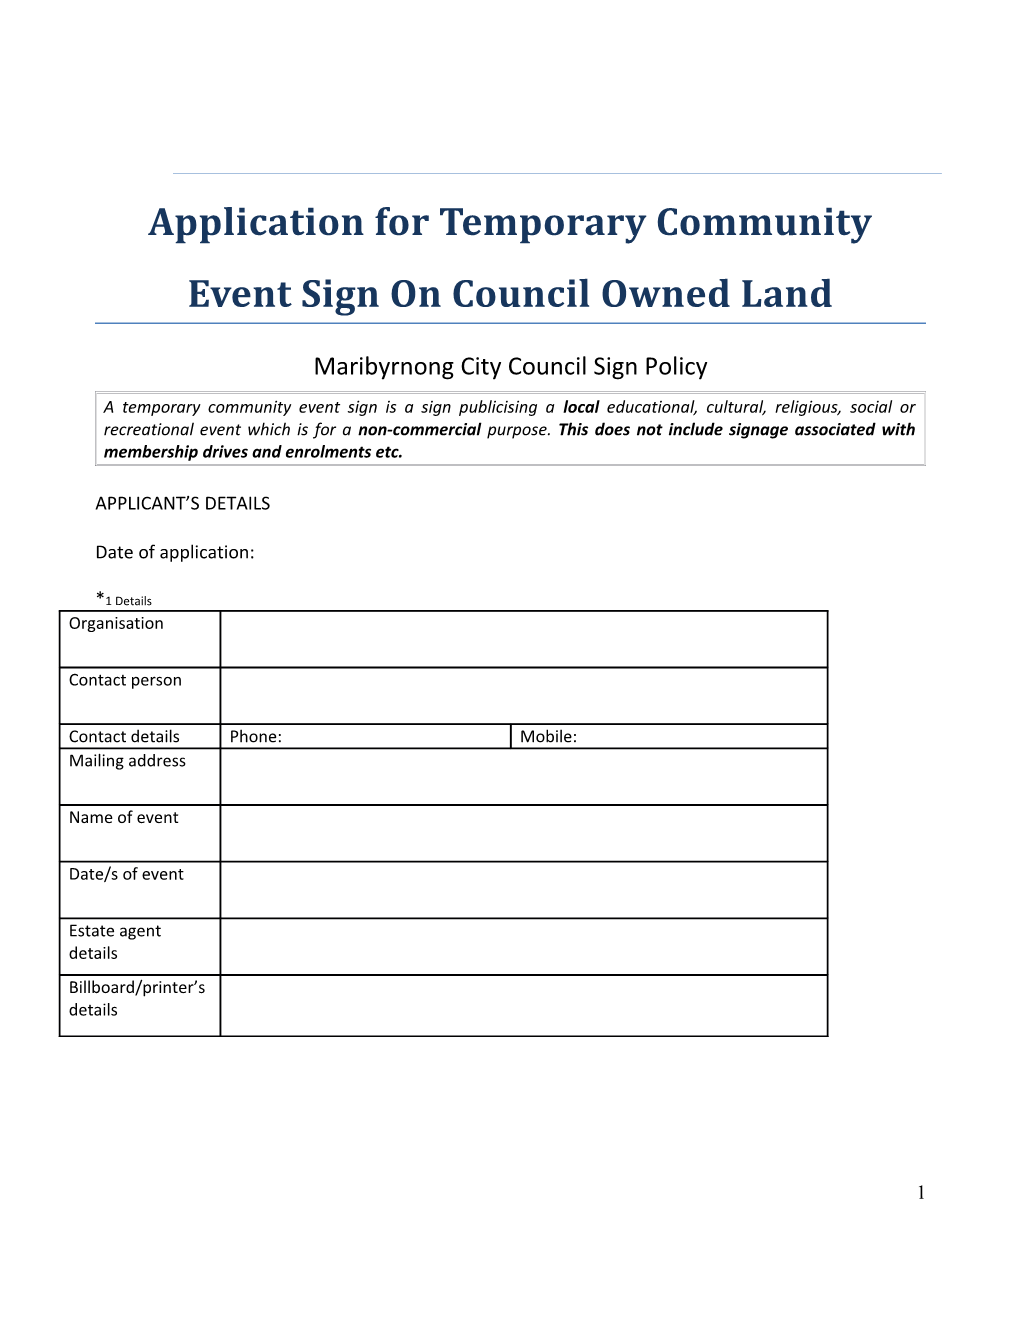 Application for Temporary Community